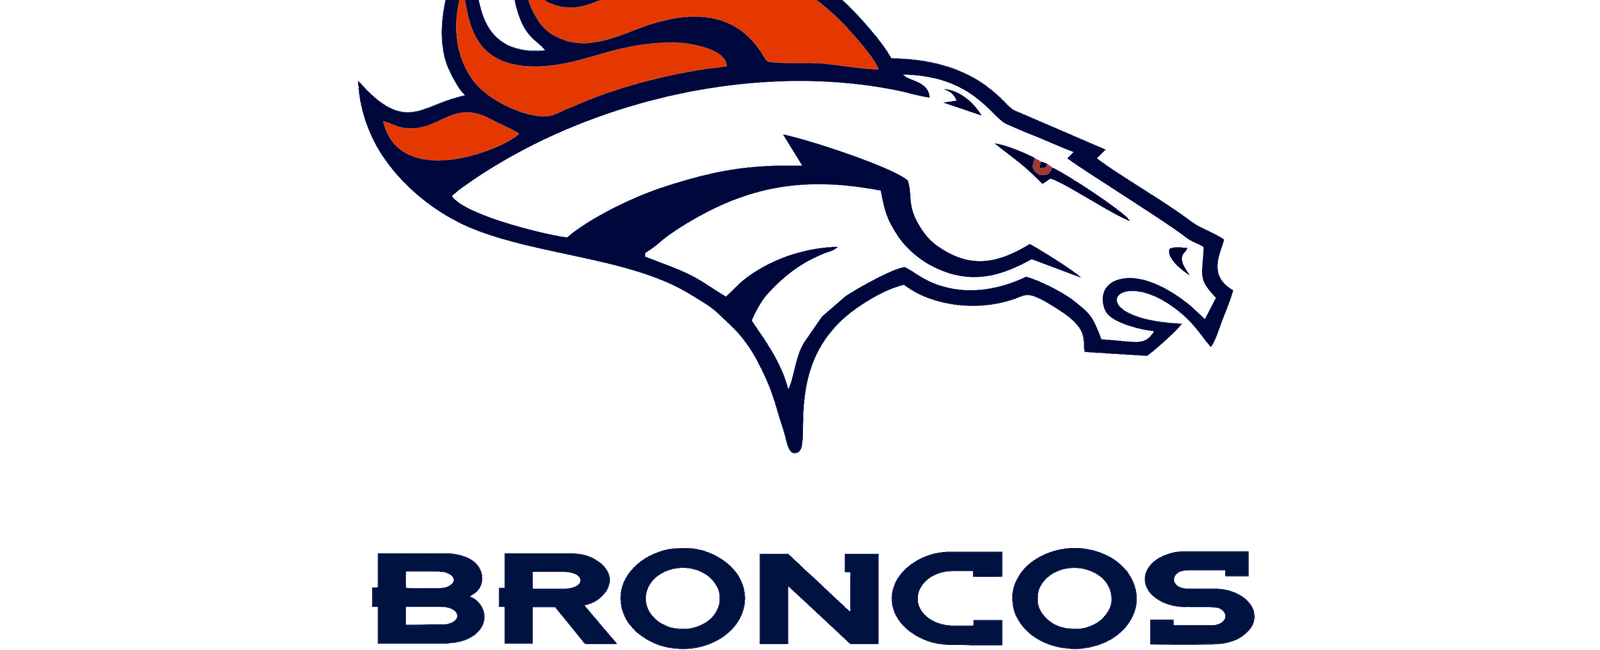 Six of tim tebow s seven wins with the miracle 2011 denver broncos were of the come from behind variety